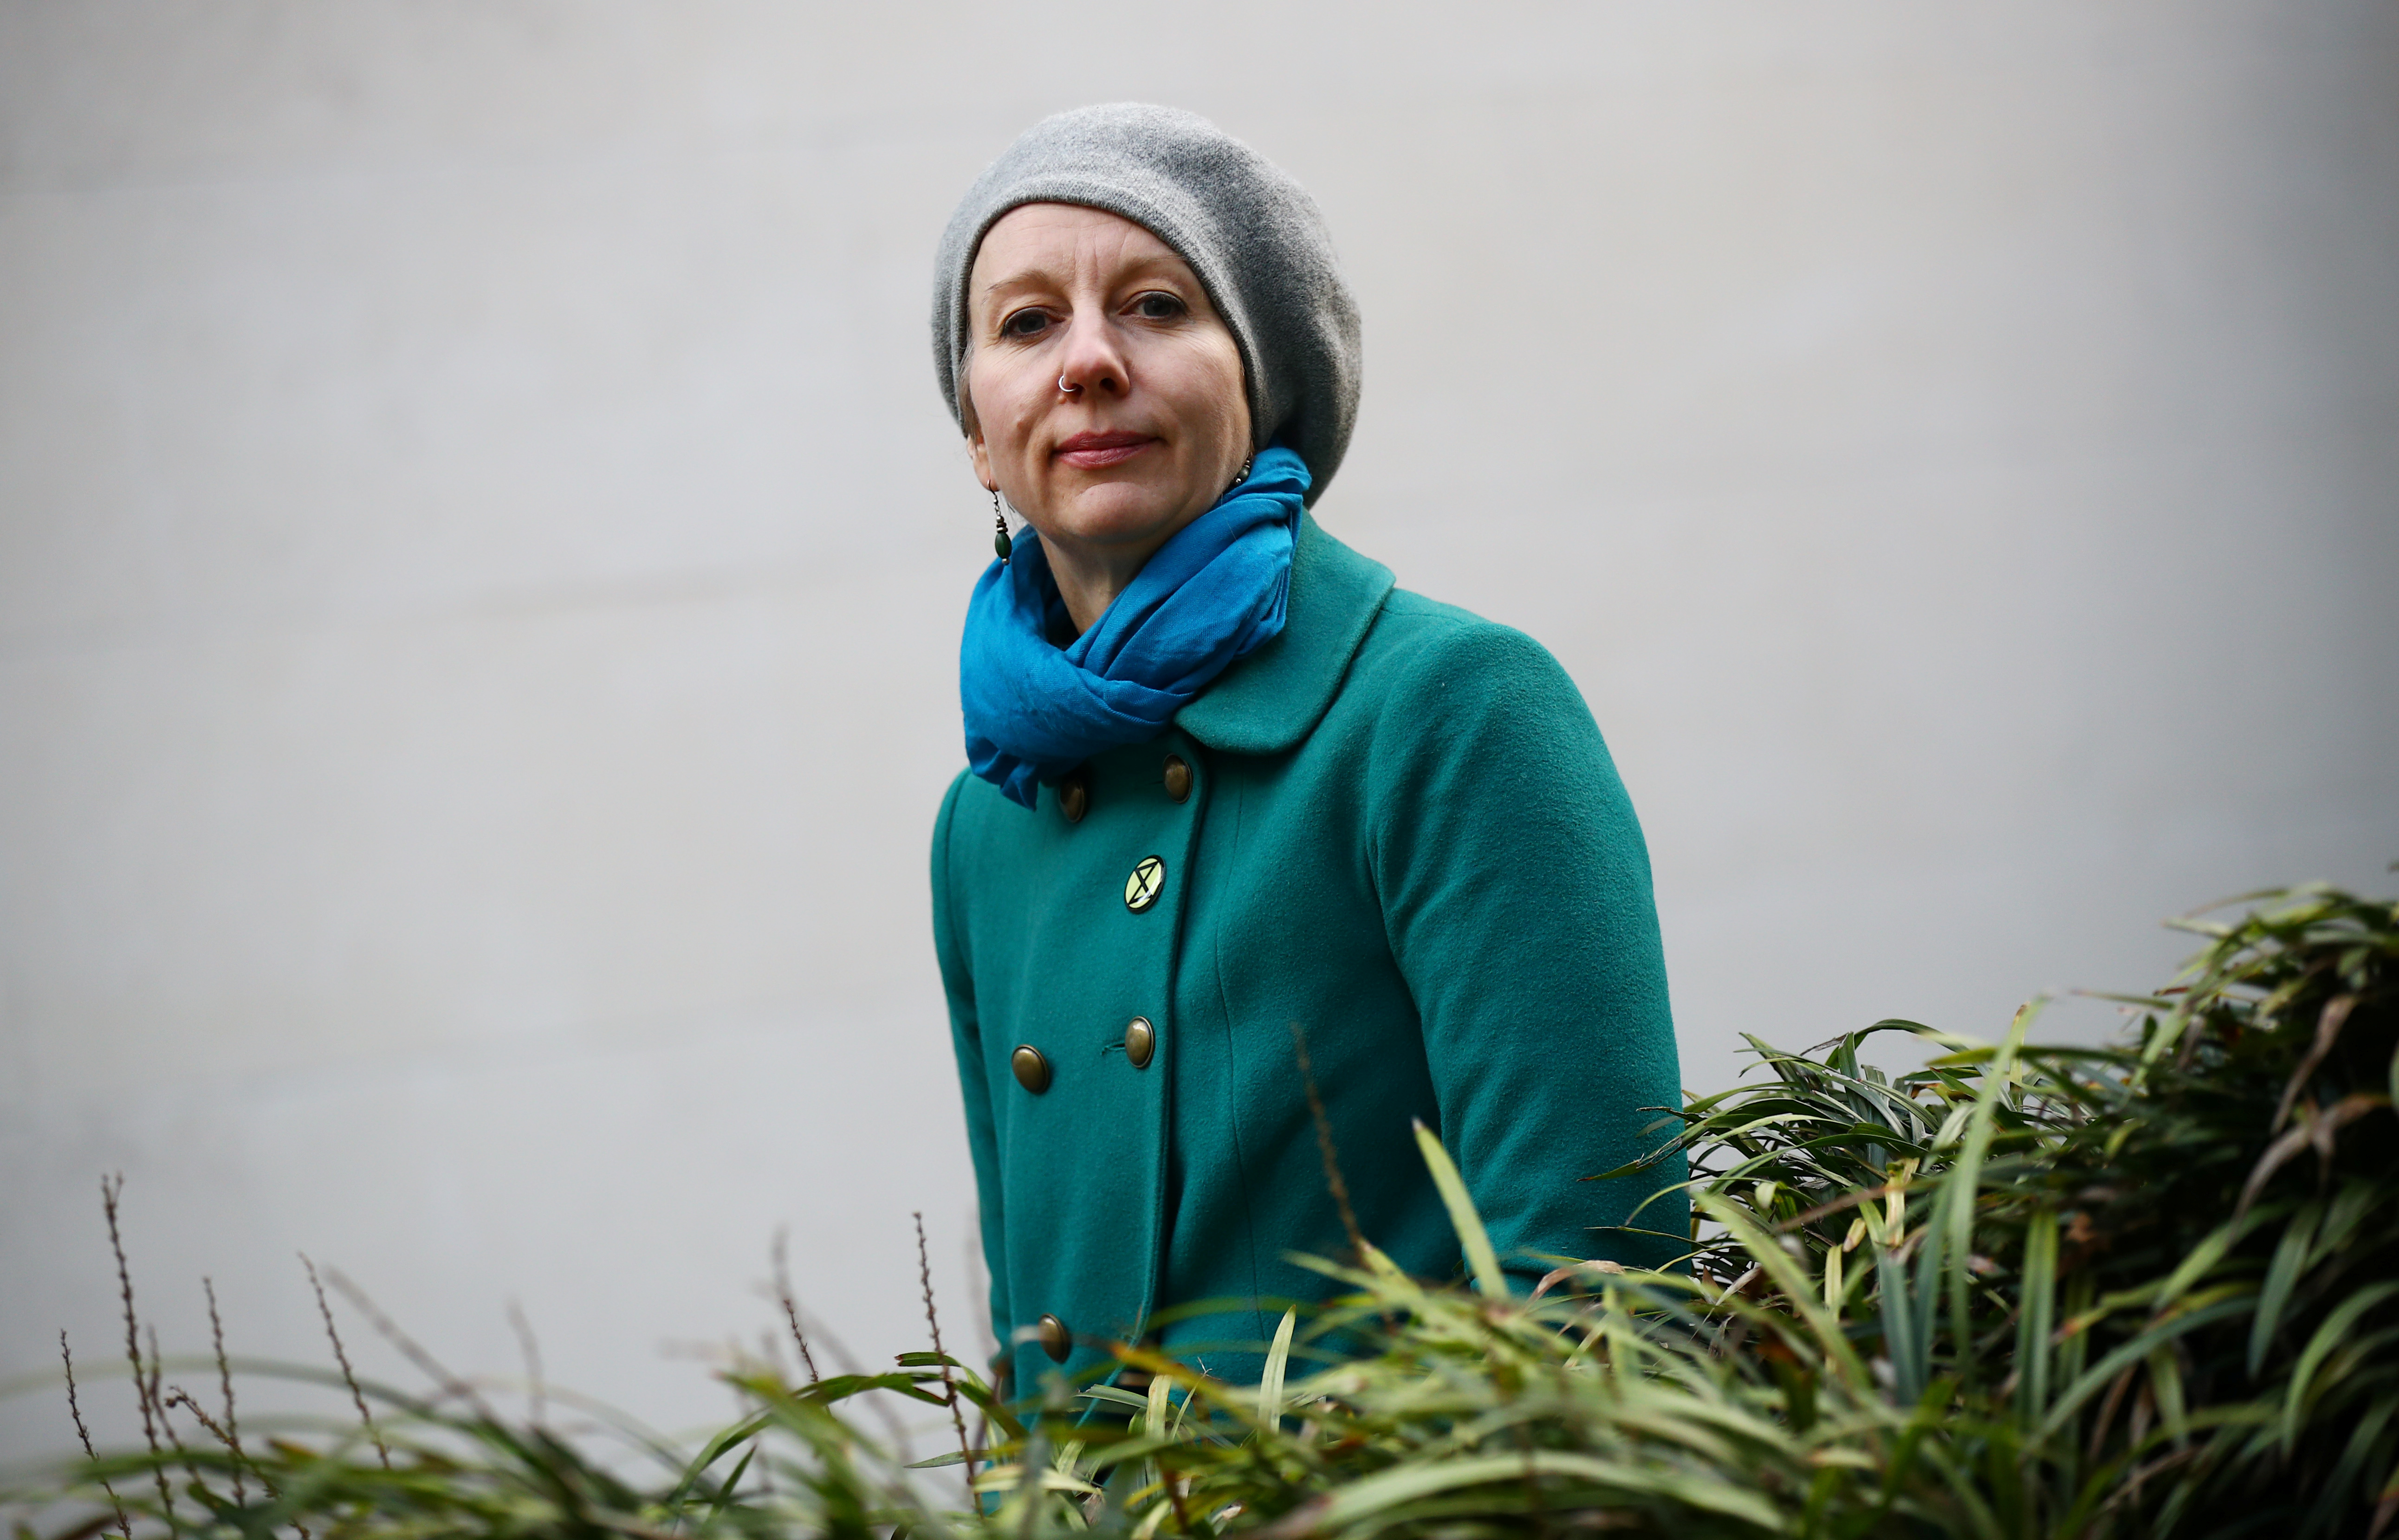 Extinction Rebellion co-founder Gail Bradbrook poses for a photograph in London